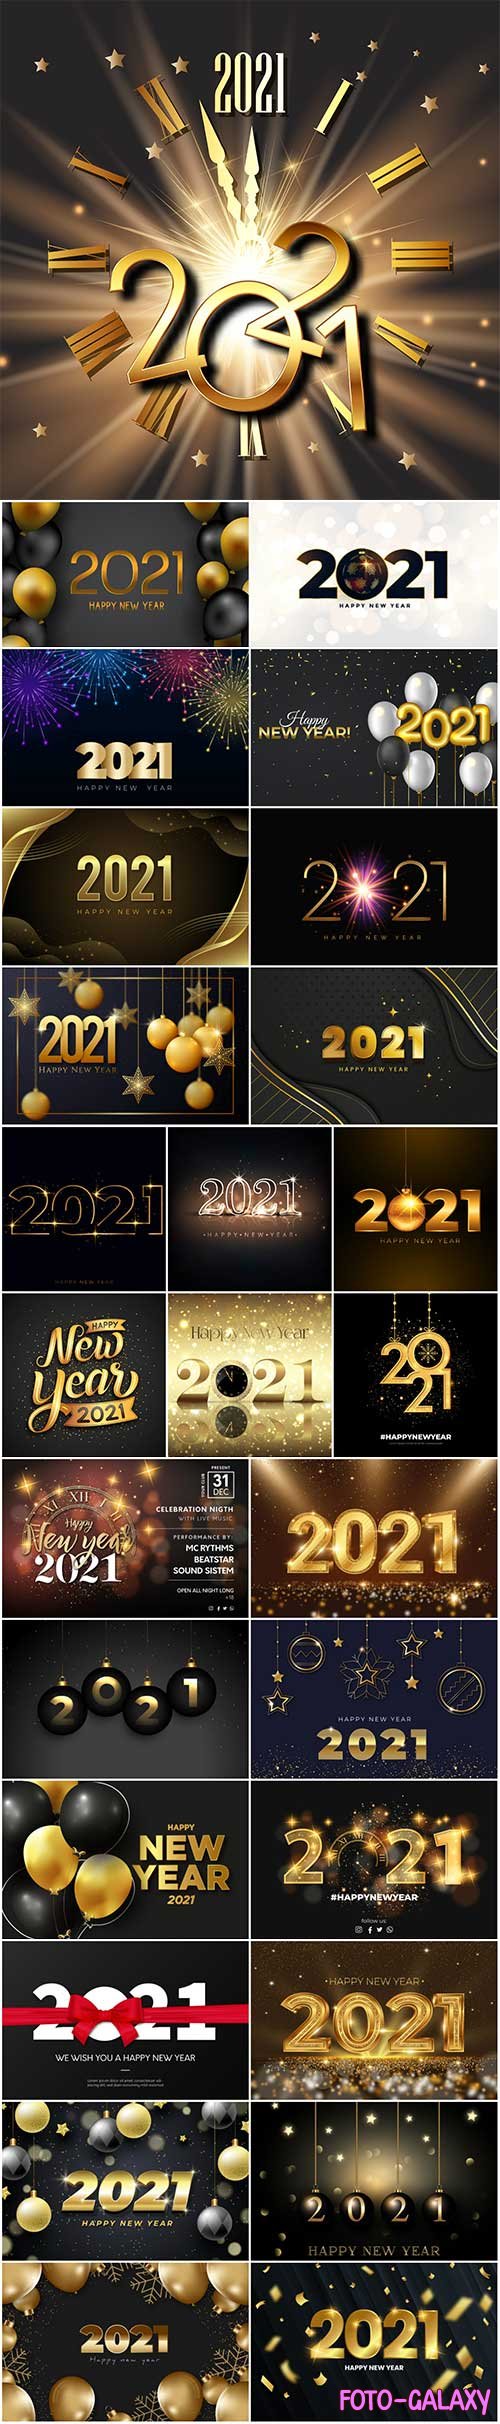 Happy new year 2021 night event vector poster with golden texture